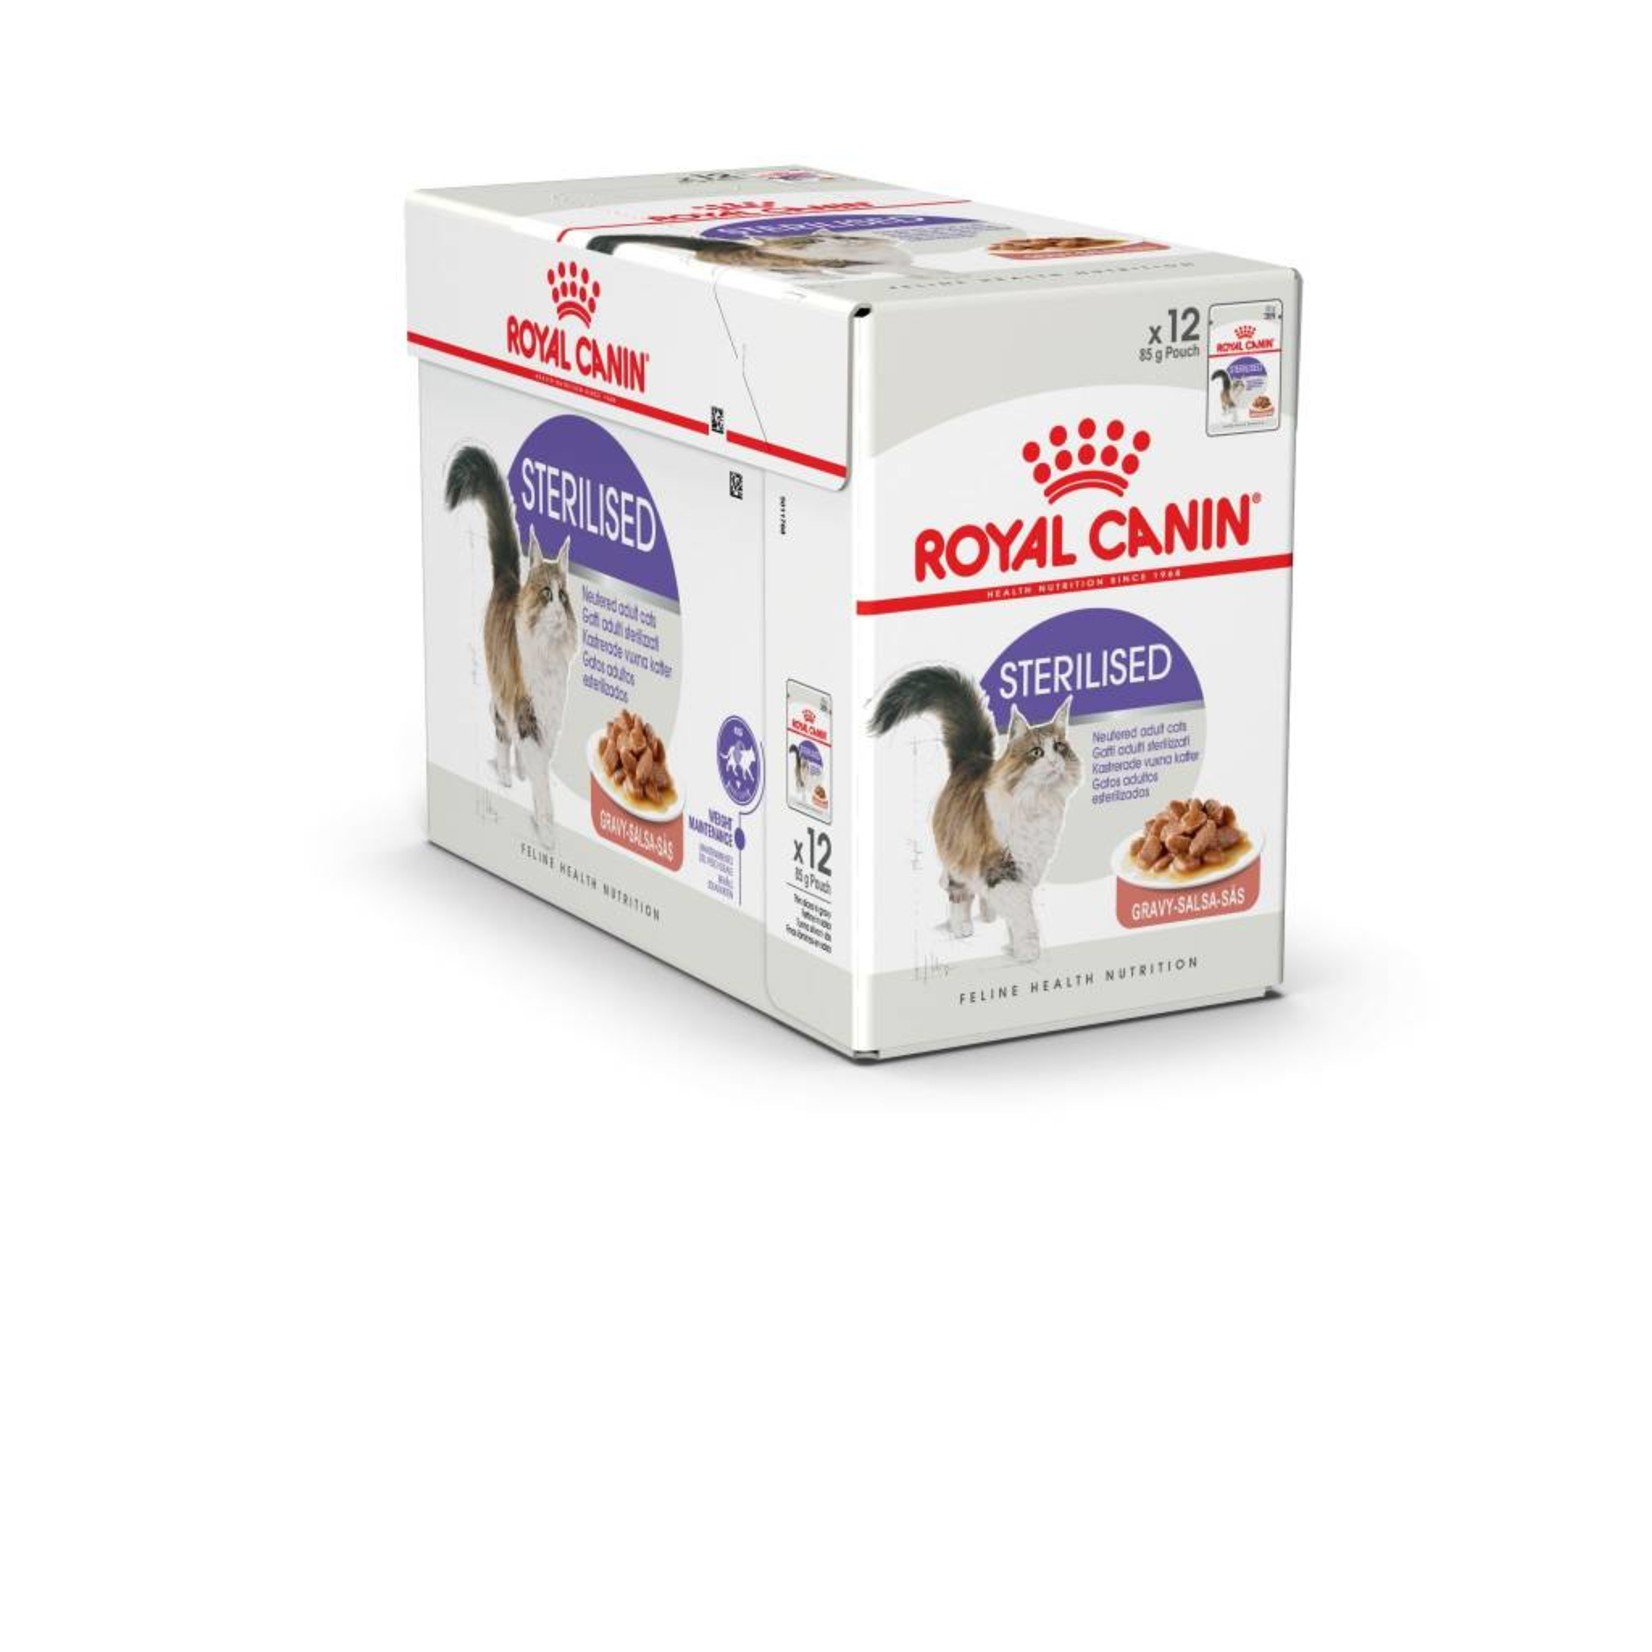 Royal Canin Sterilised Adult Cat Wet Food Pouch in Gravy, 85g, box of 12